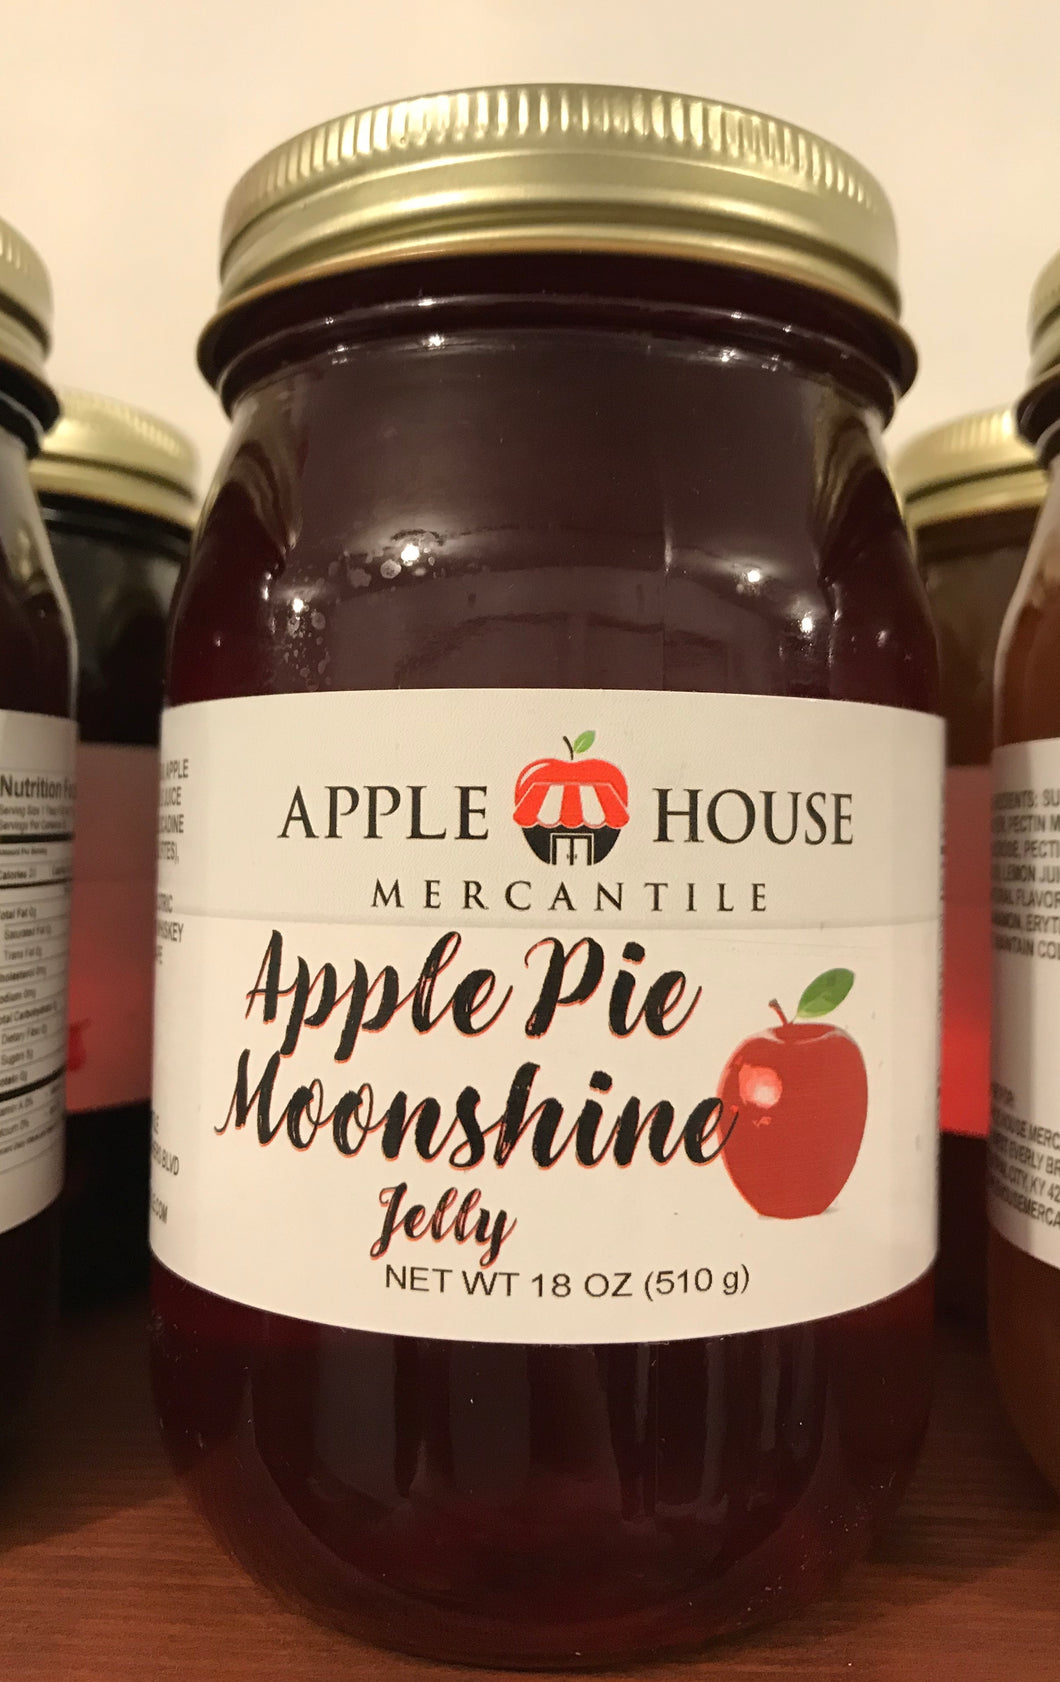 Apple Pie Moonshine Jelly by AHM